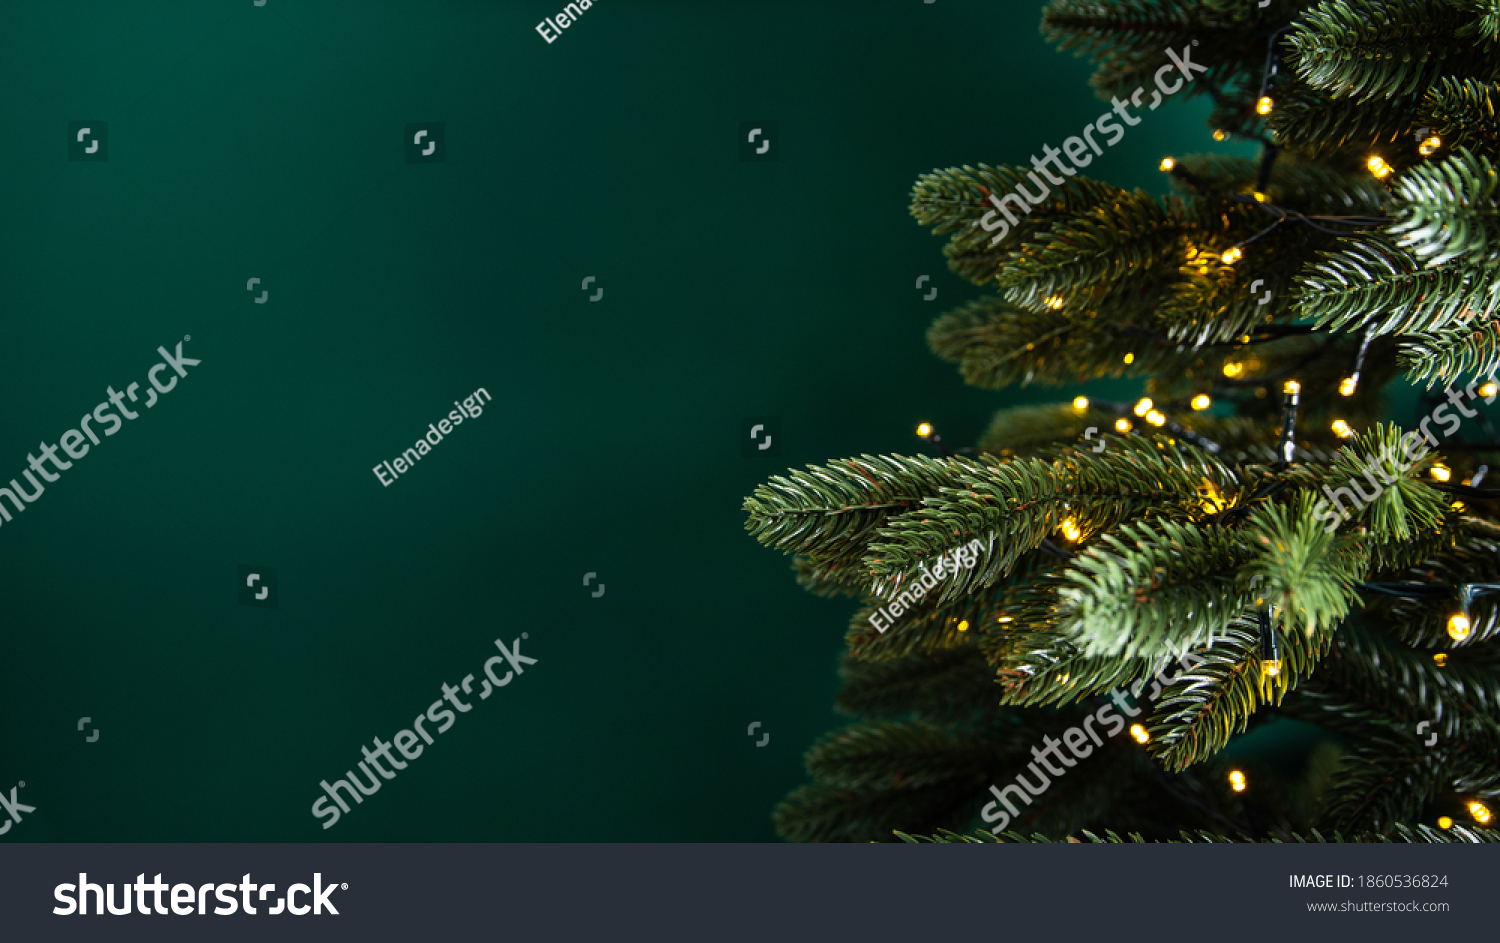 Decorated with lights Christmas tree on dark green background. Merry Christmas and Happy Holidays greeting card, frame, banner. New Year. Noel. Winter holiday theme.  #1860536824